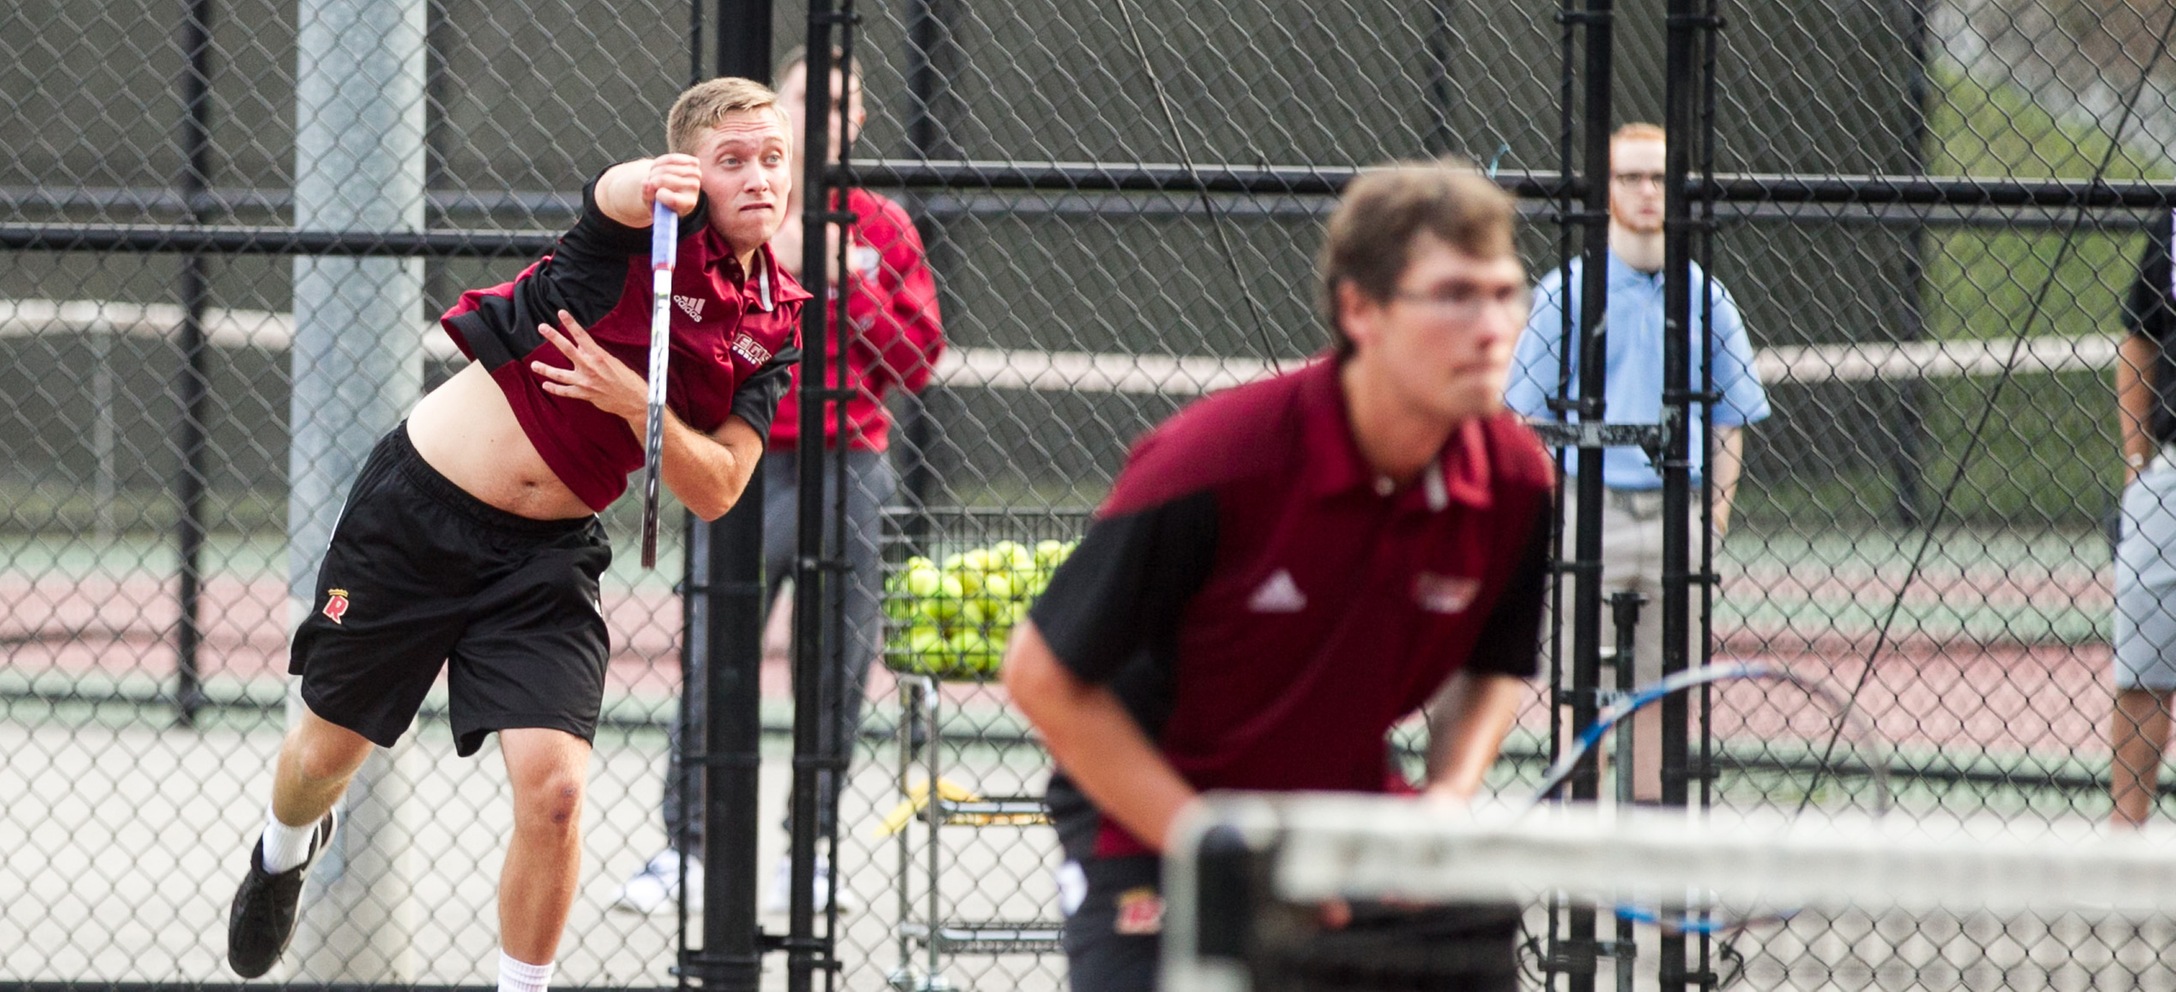 Men's Tennis Drops First Match of 2018 In Loss To Judson (IL)